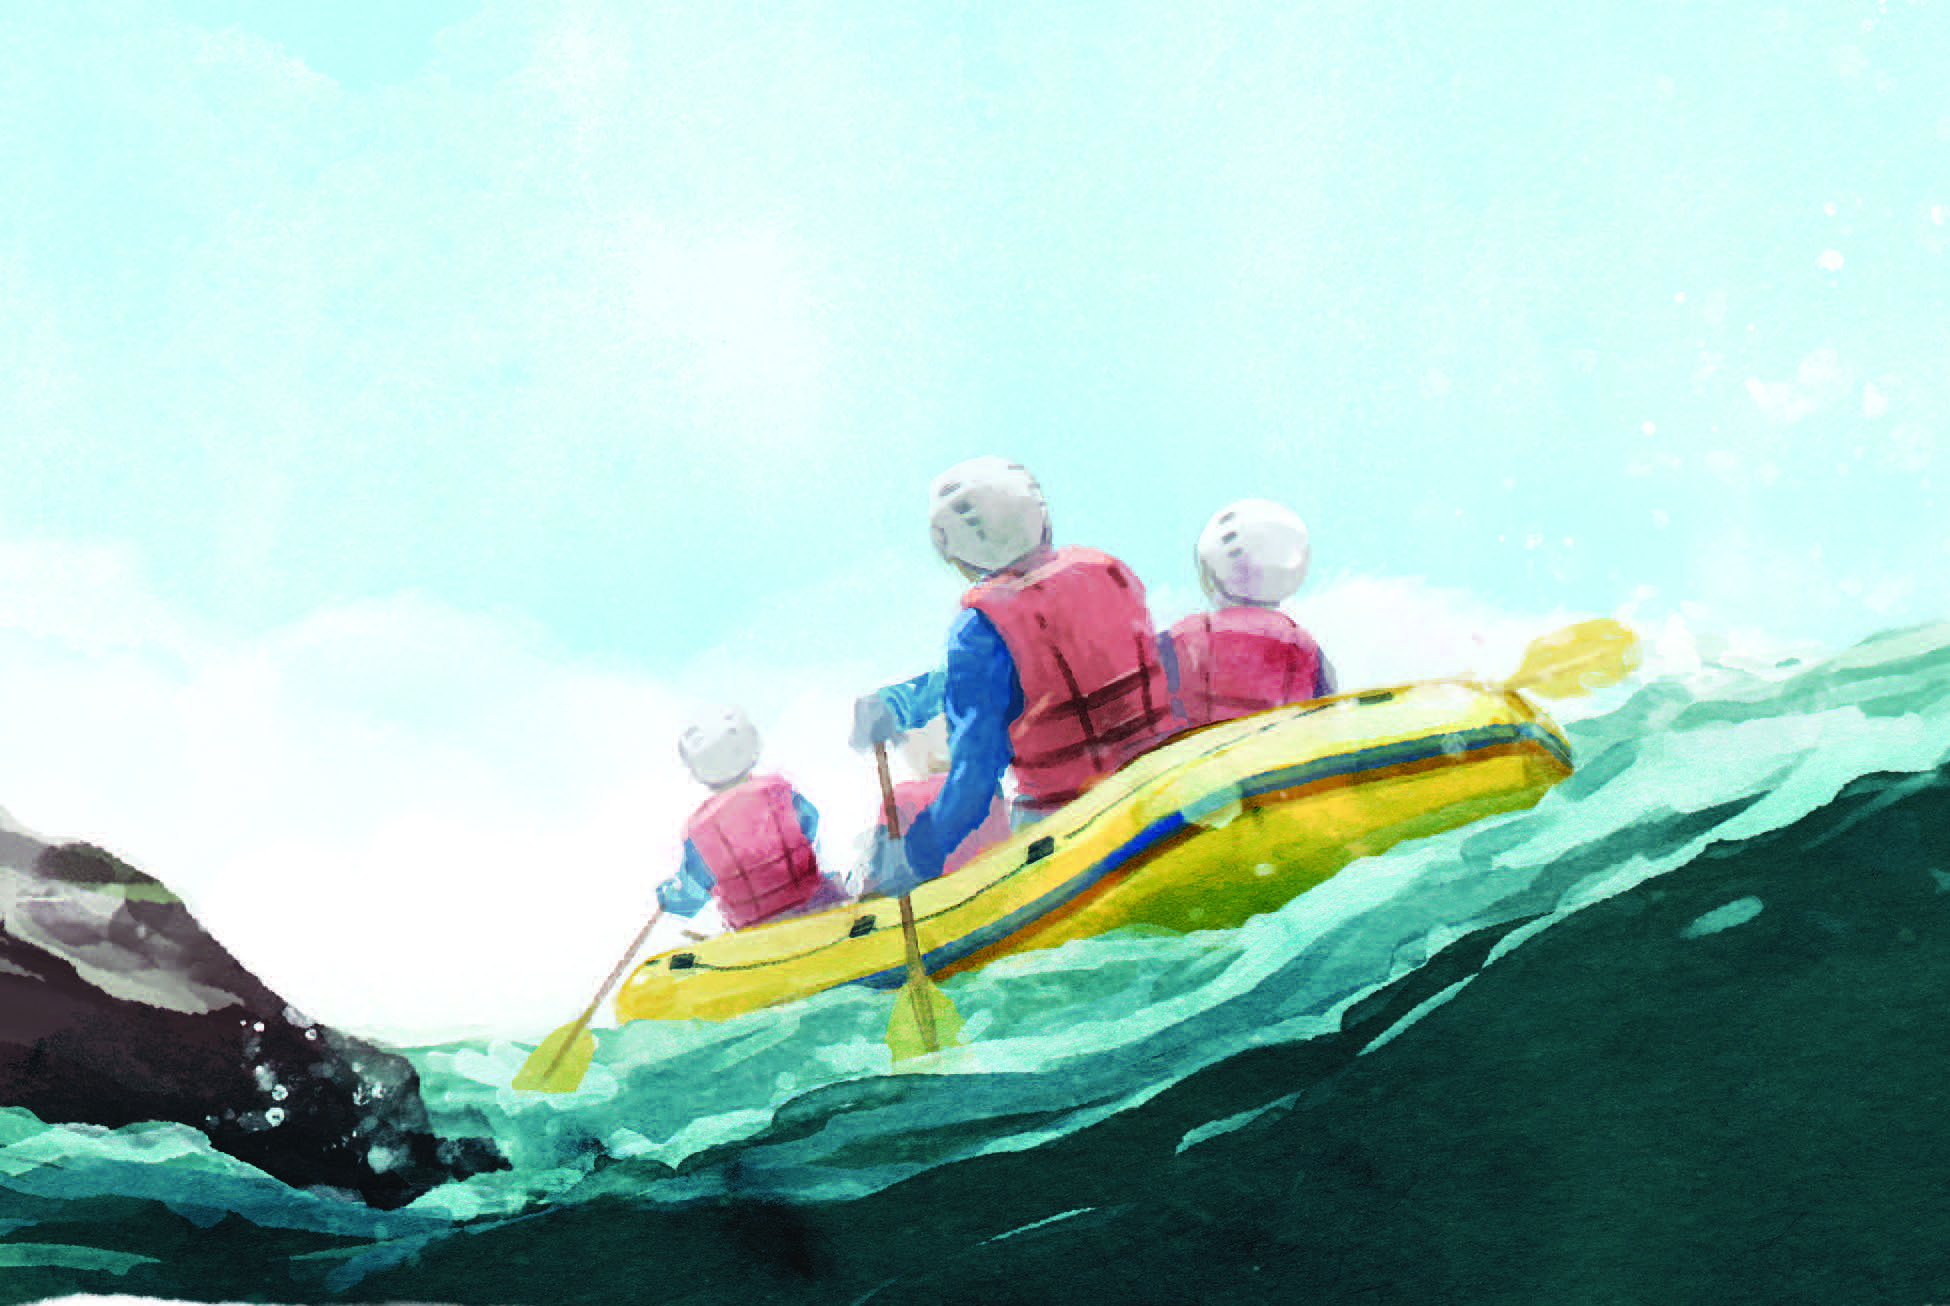 Drawing of 4 people on a raft in rough waters